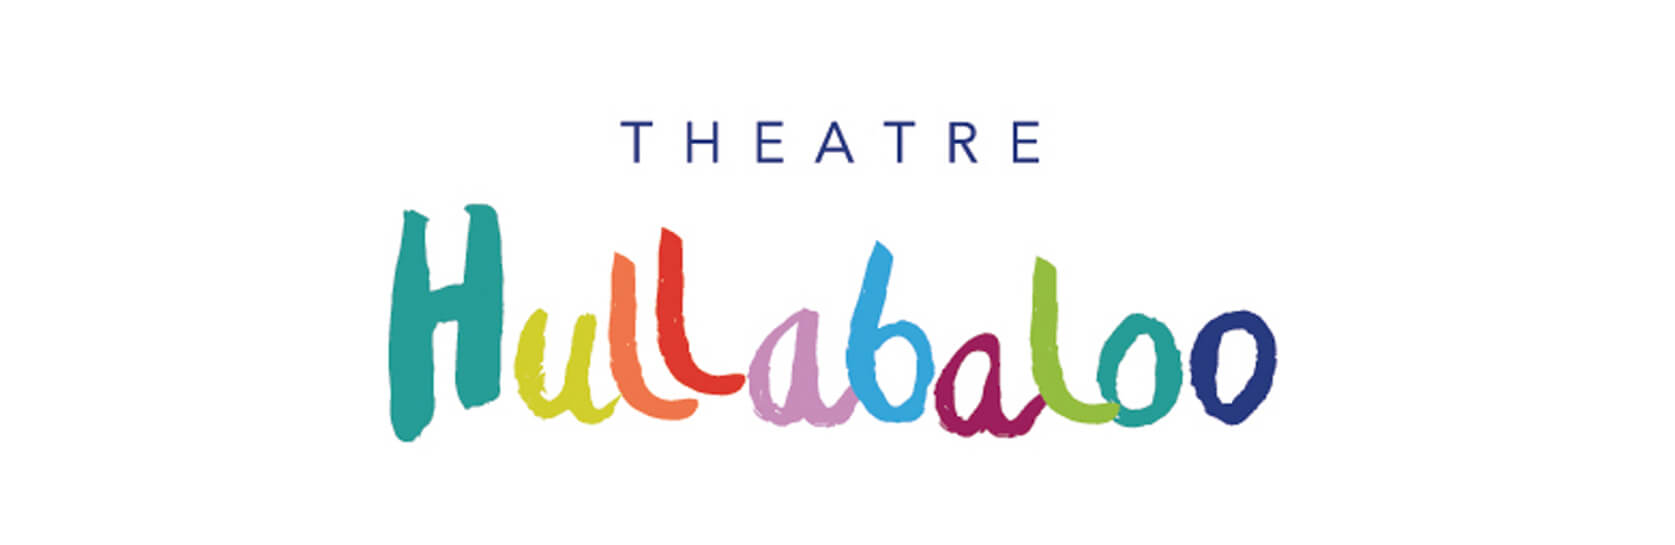 Theatre Hullabaloo privacy notice